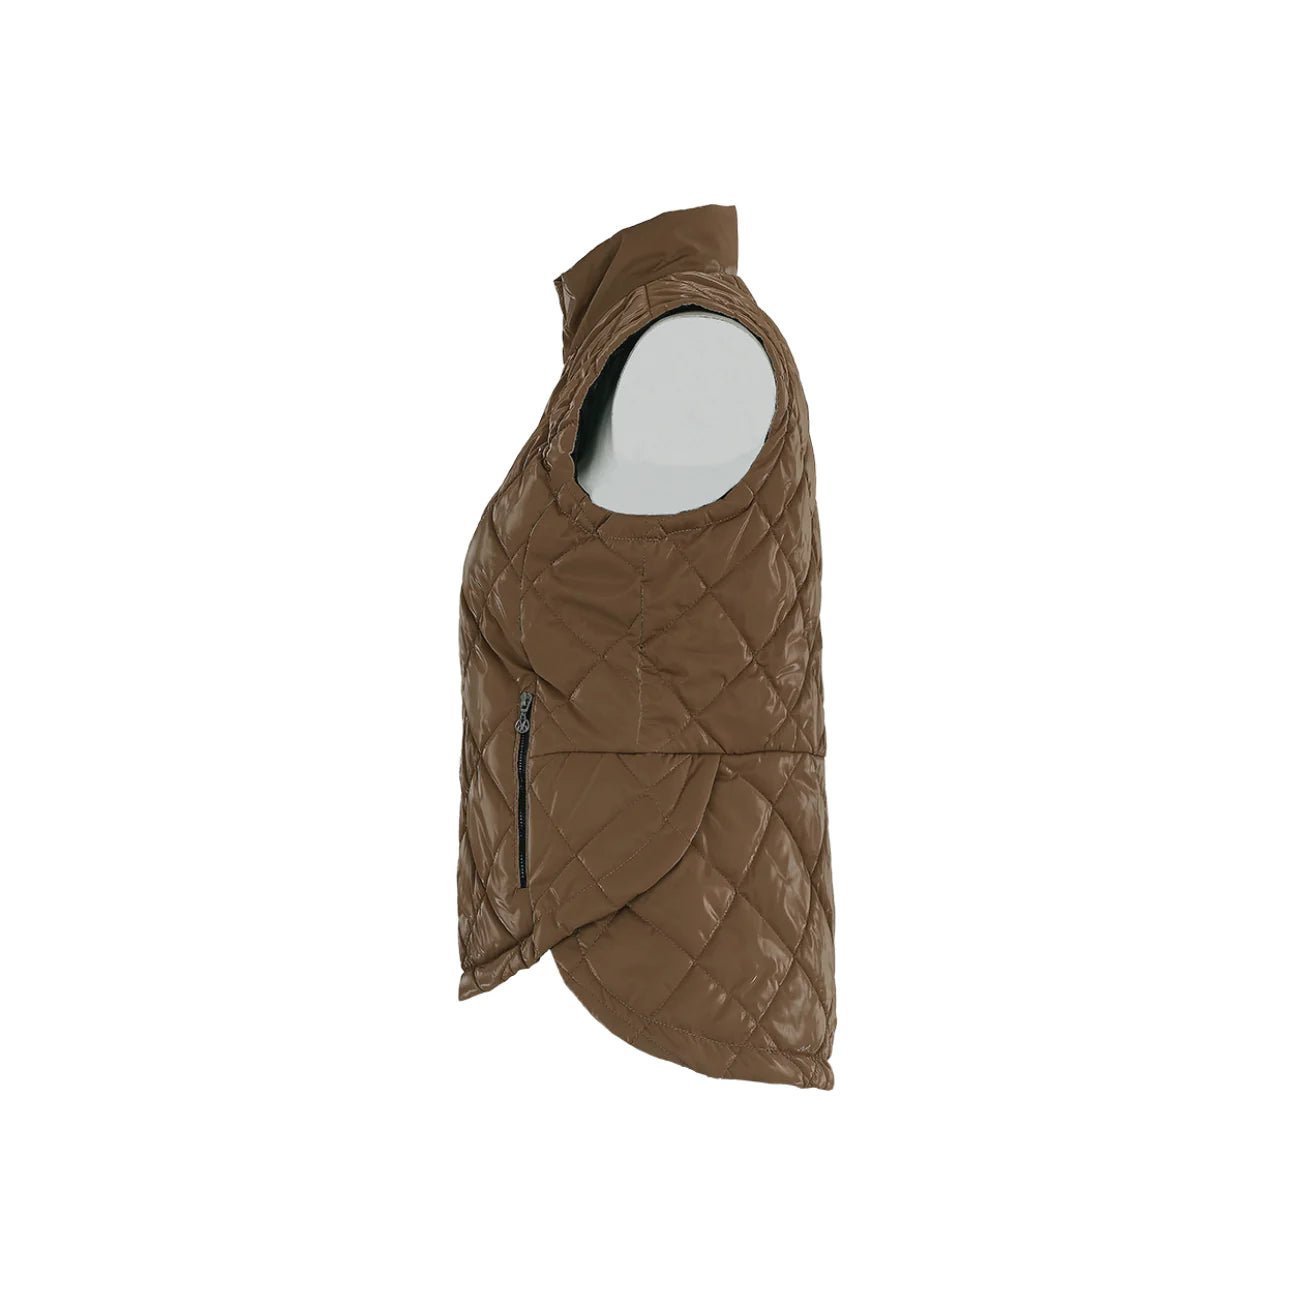 Dolcezza Quilted Vest 73860 - Camel